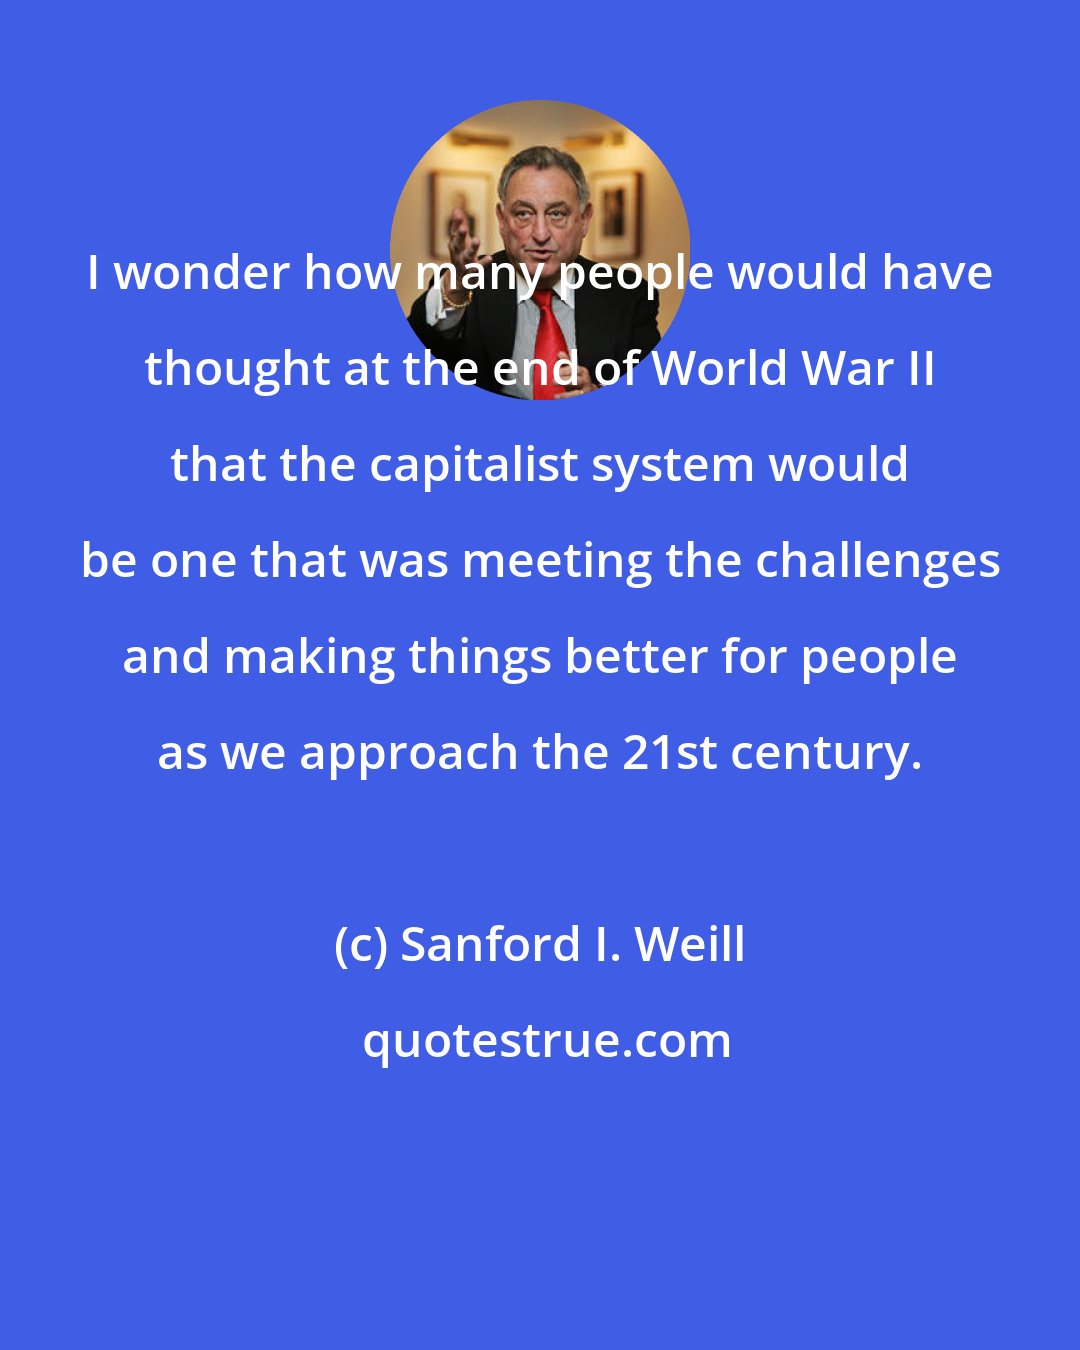 Sanford I. Weill: I wonder how many people would have thought at the end of World War II that the capitalist system would be one that was meeting the challenges and making things better for people as we approach the 21st century.